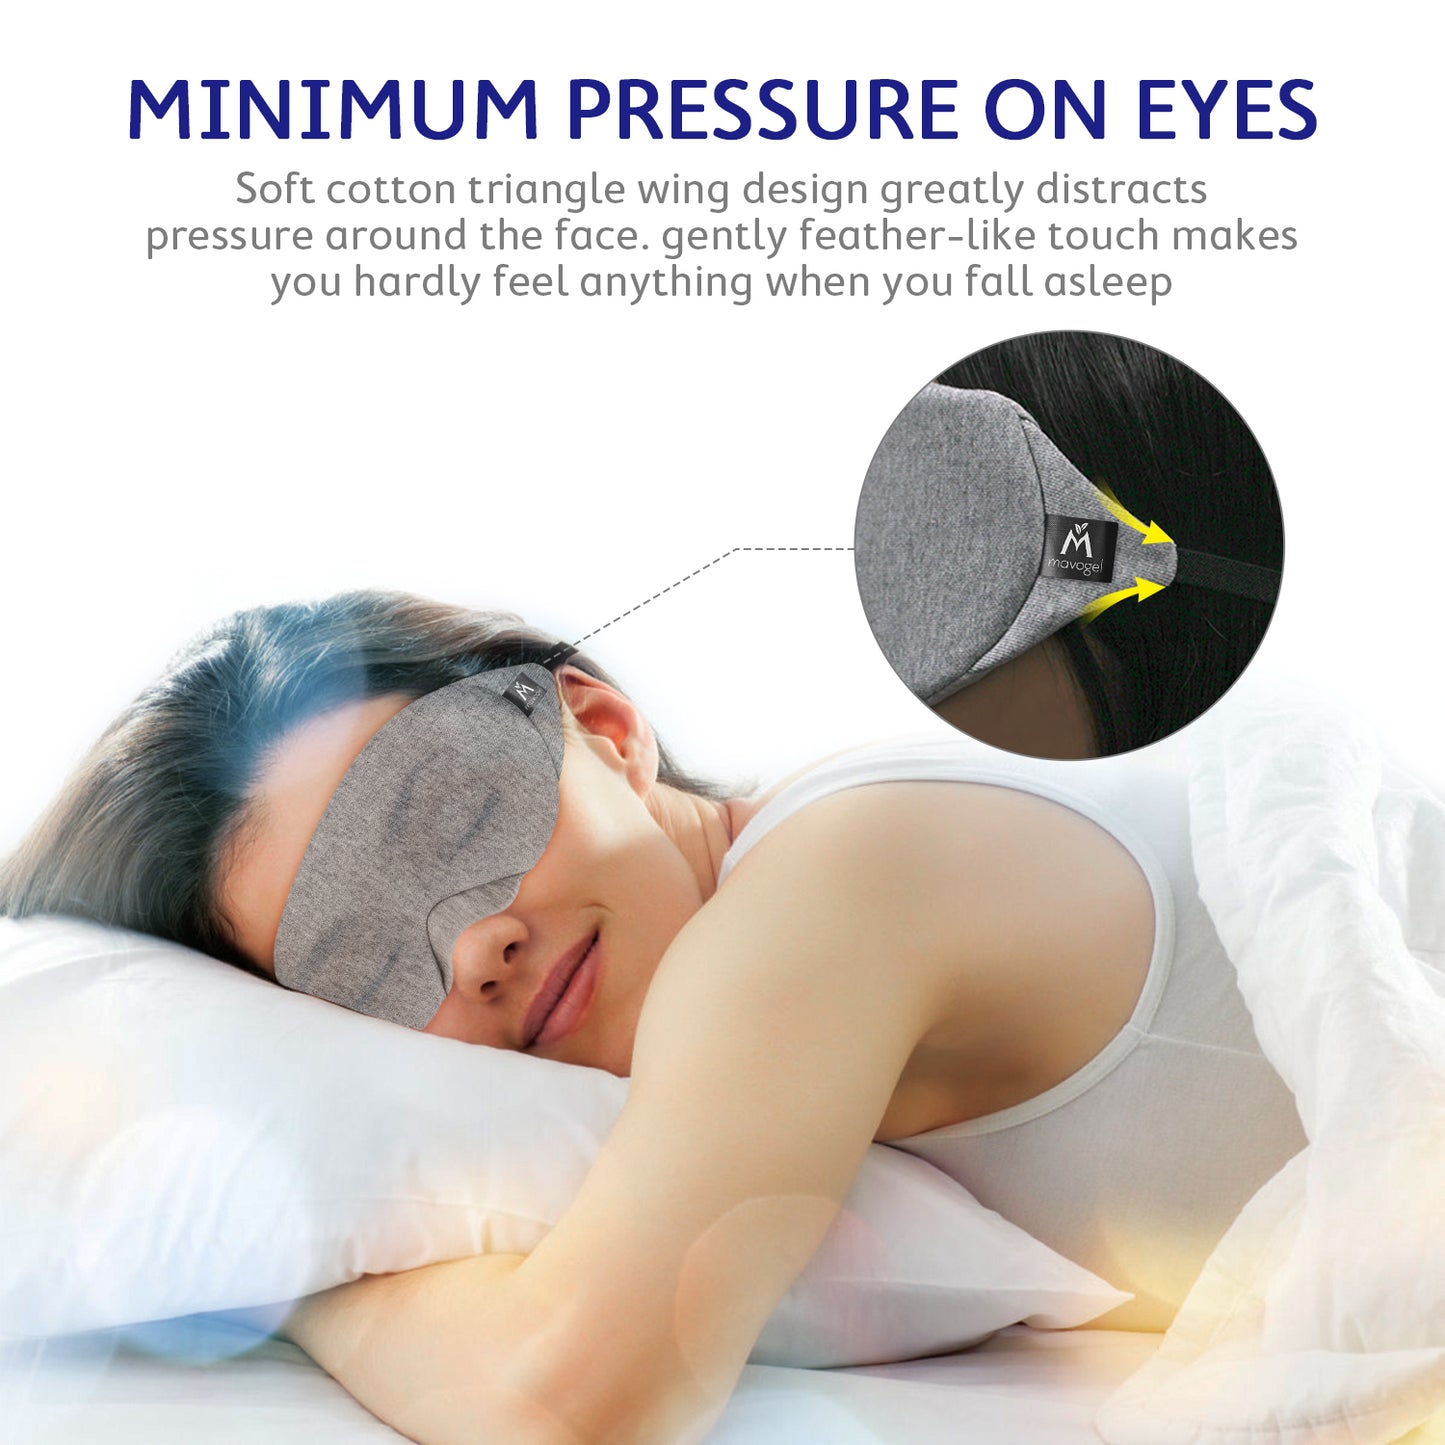 Mavogel Cotton Sleep Mask - Light Blocking Soft and Comfortable Night Eye Mask, Includes Travel Pouch (Grey)